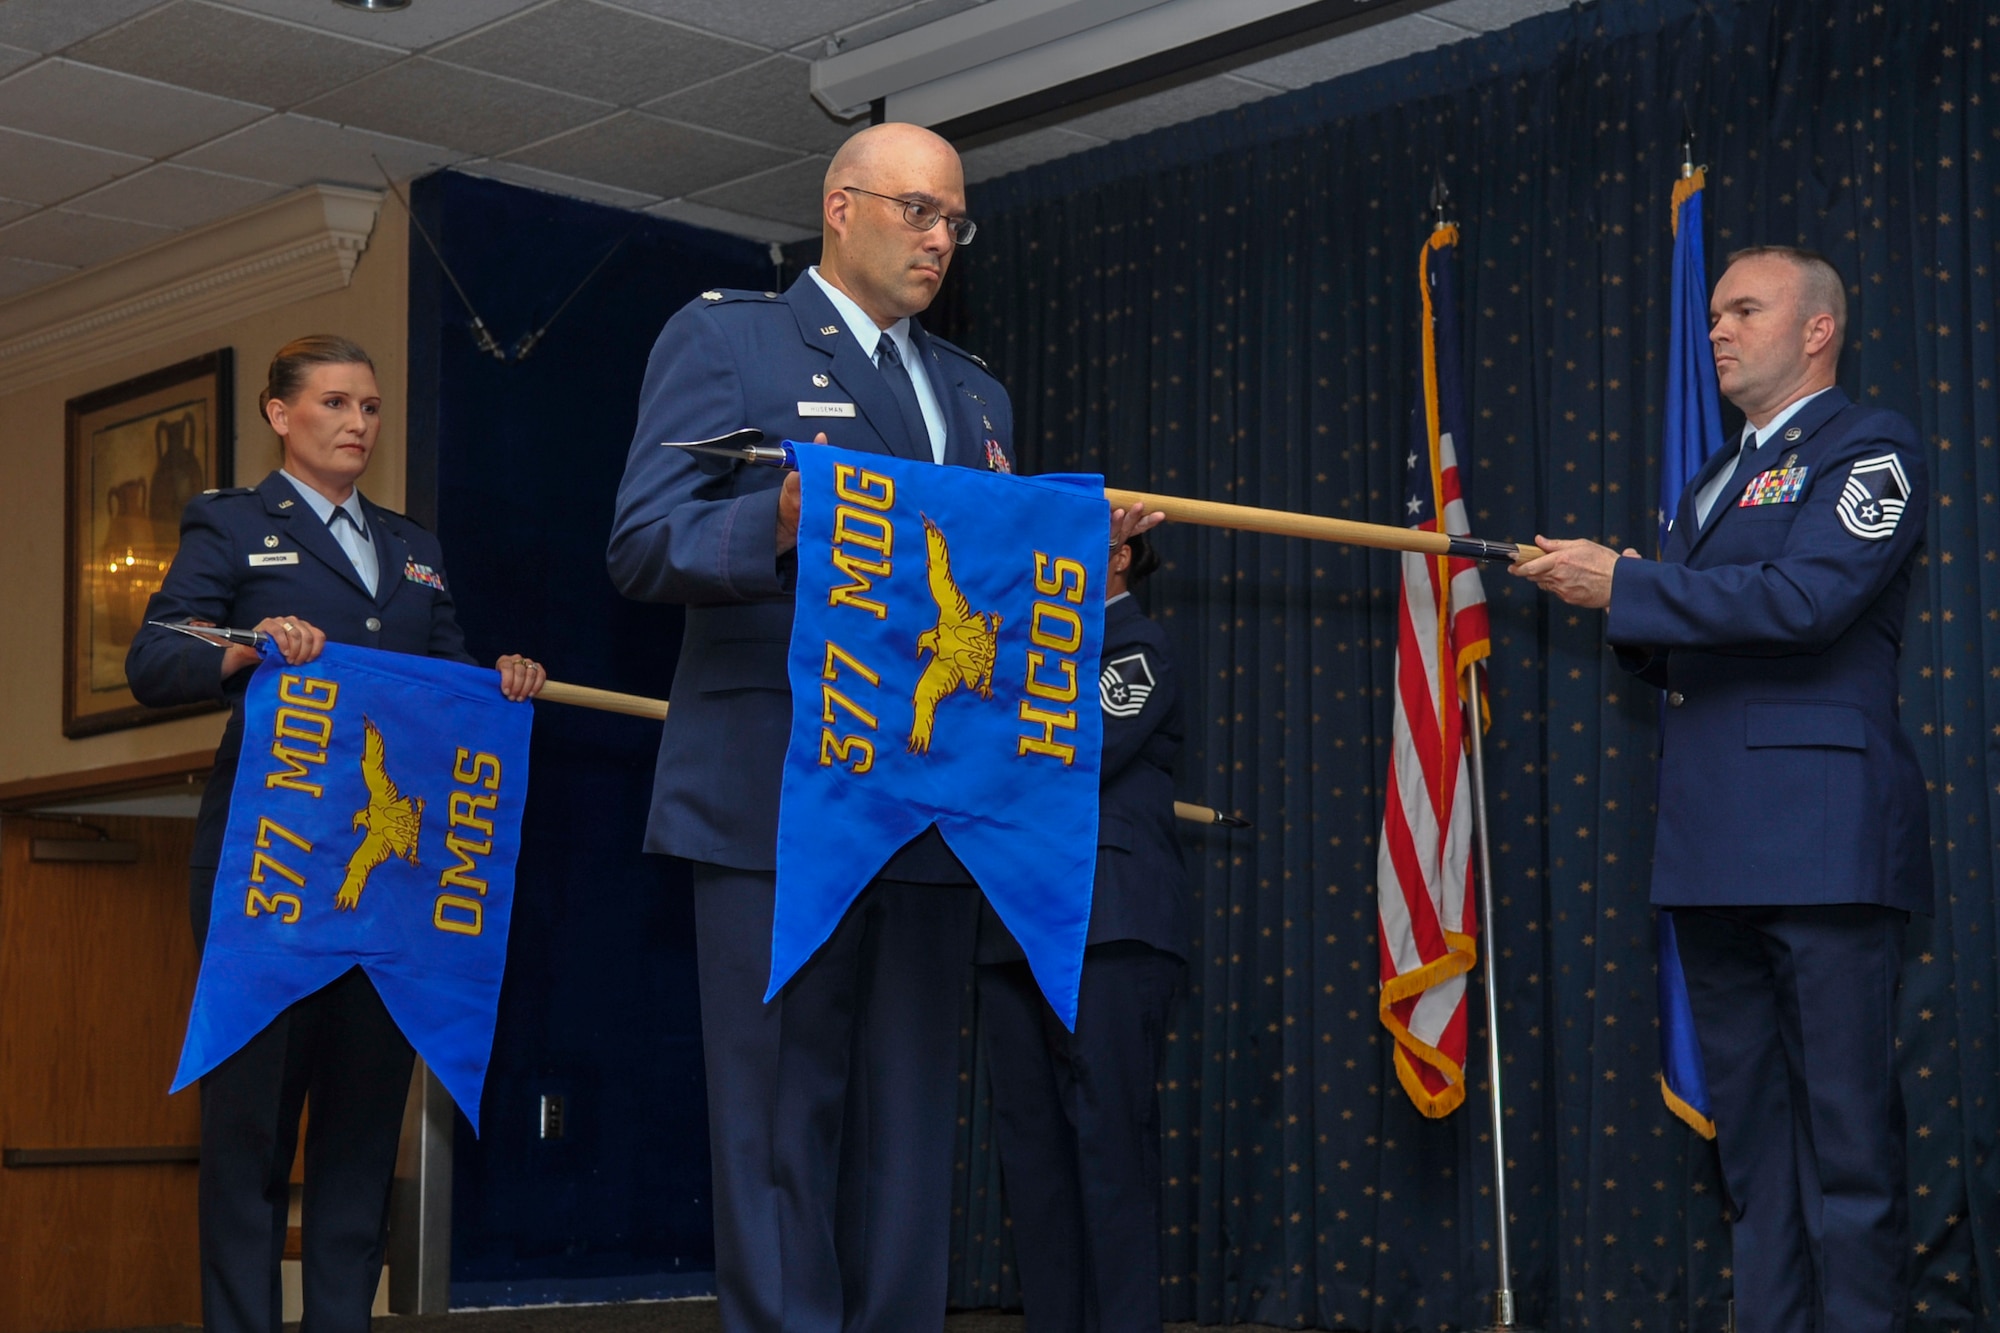 Guidons belonging to the 377th Operational Medical Readiness Squadron and the 377th Health Care Operations Squadron are unfurled in a redesignation ceremony at Kirtland Air Force Base, N.M., August 16, 2019. The redesignation ceremony is part of military history dating back to the 18th century during the reign of King Frederick the Great of Prussia. During this time, organizational flags were developed with color arrangement and symbols unique to a particular unit. (U.S. Air Force photo by Airman 1st Class Austin J. Prisbrey)